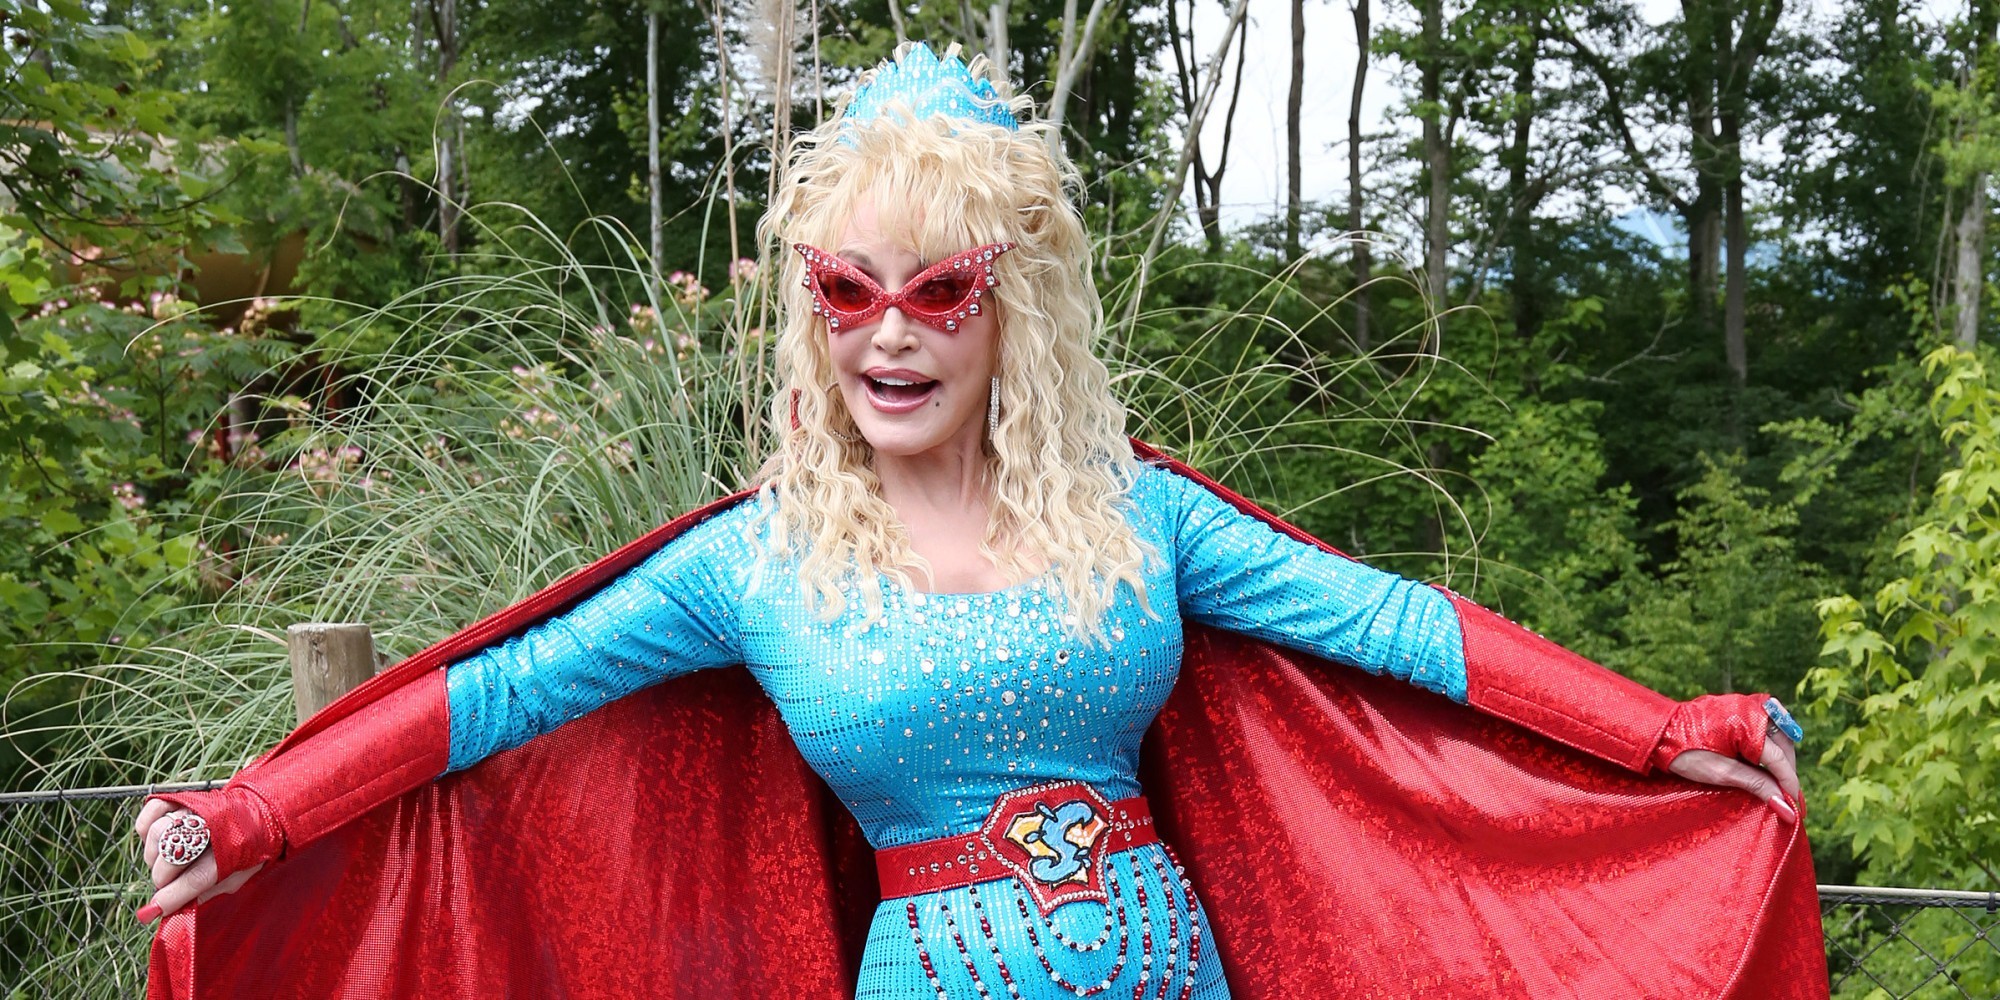 Find more DOLLY PARTON ANNOUNCES HER AUSTRALIAN TOUR IN 2014 FOR BLUE SMOKE. 